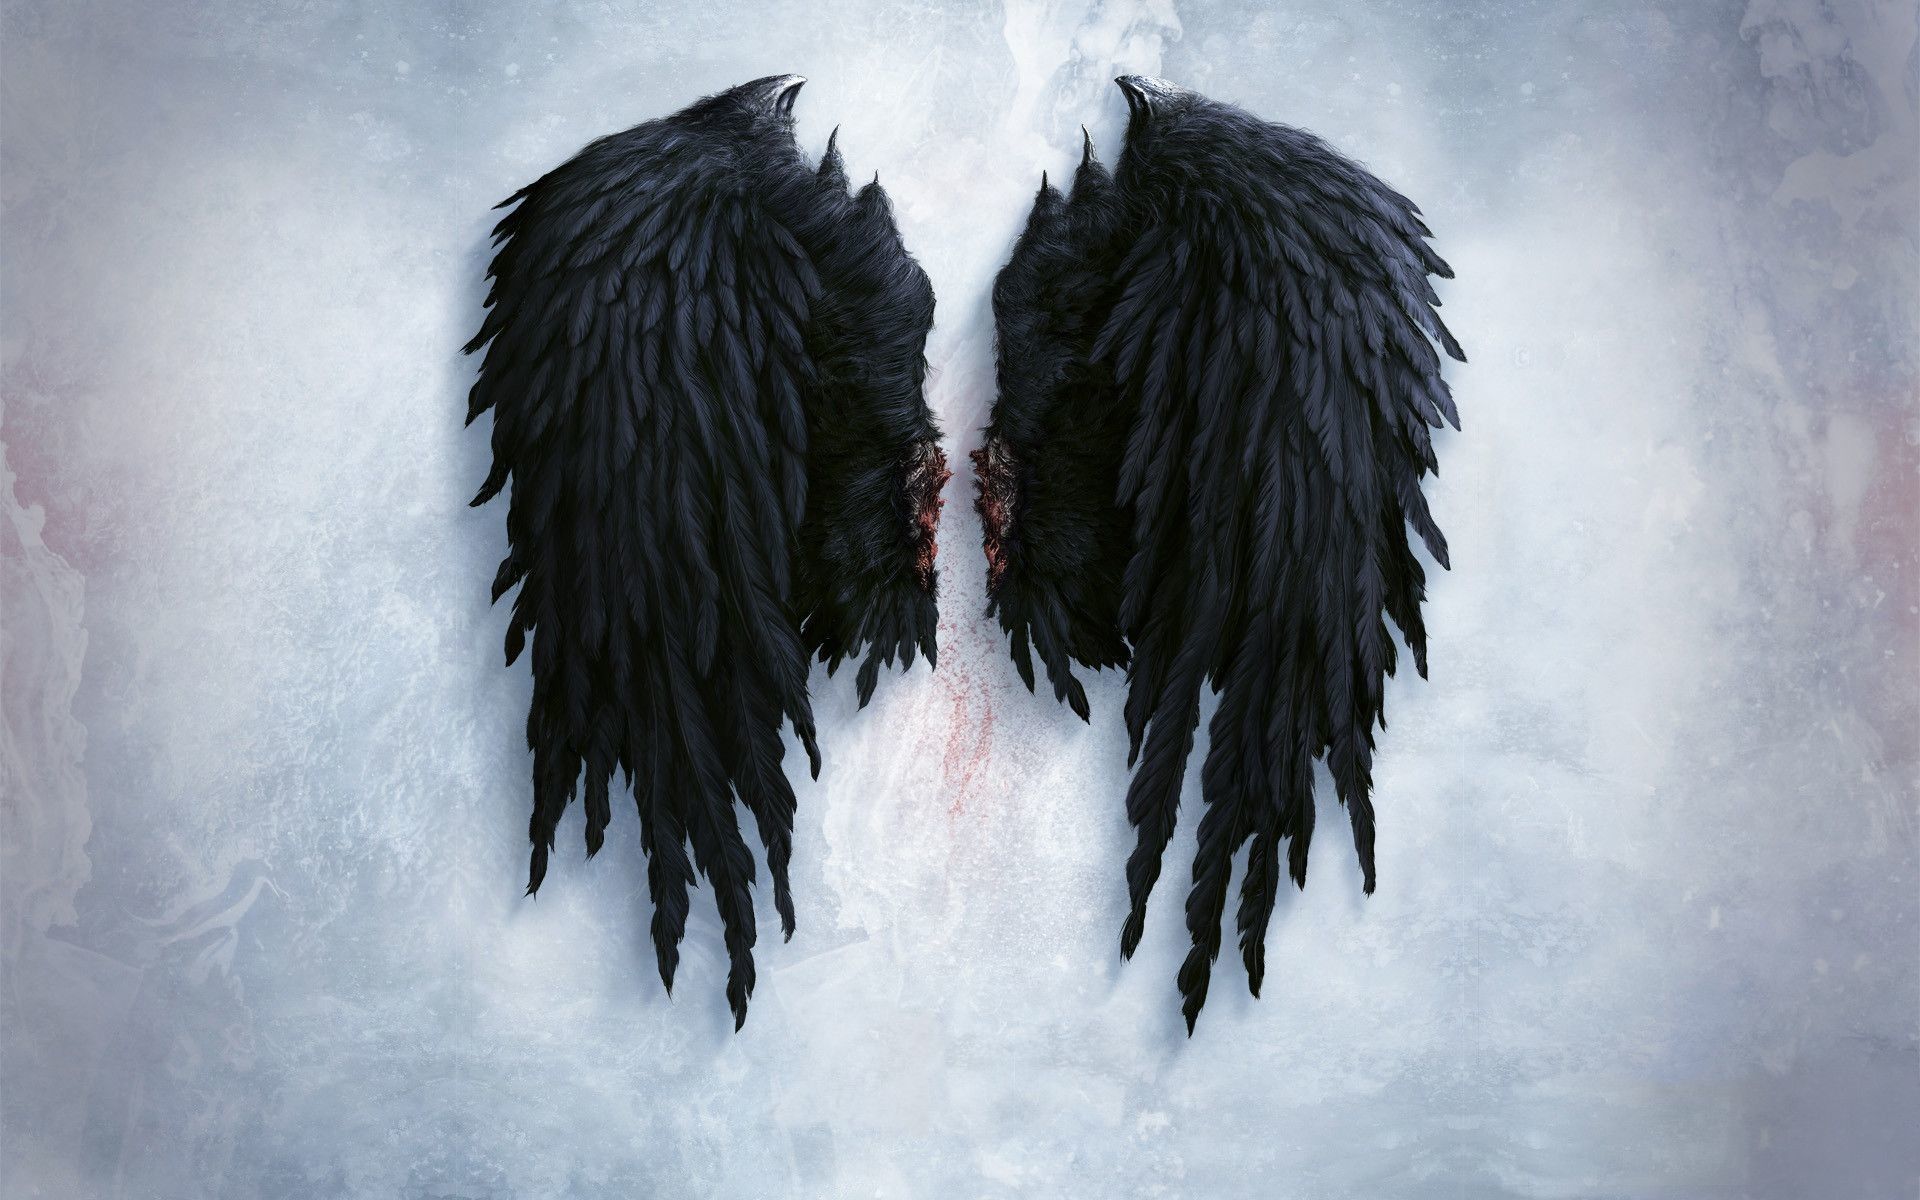 A black angel with wings on the ground - Wings